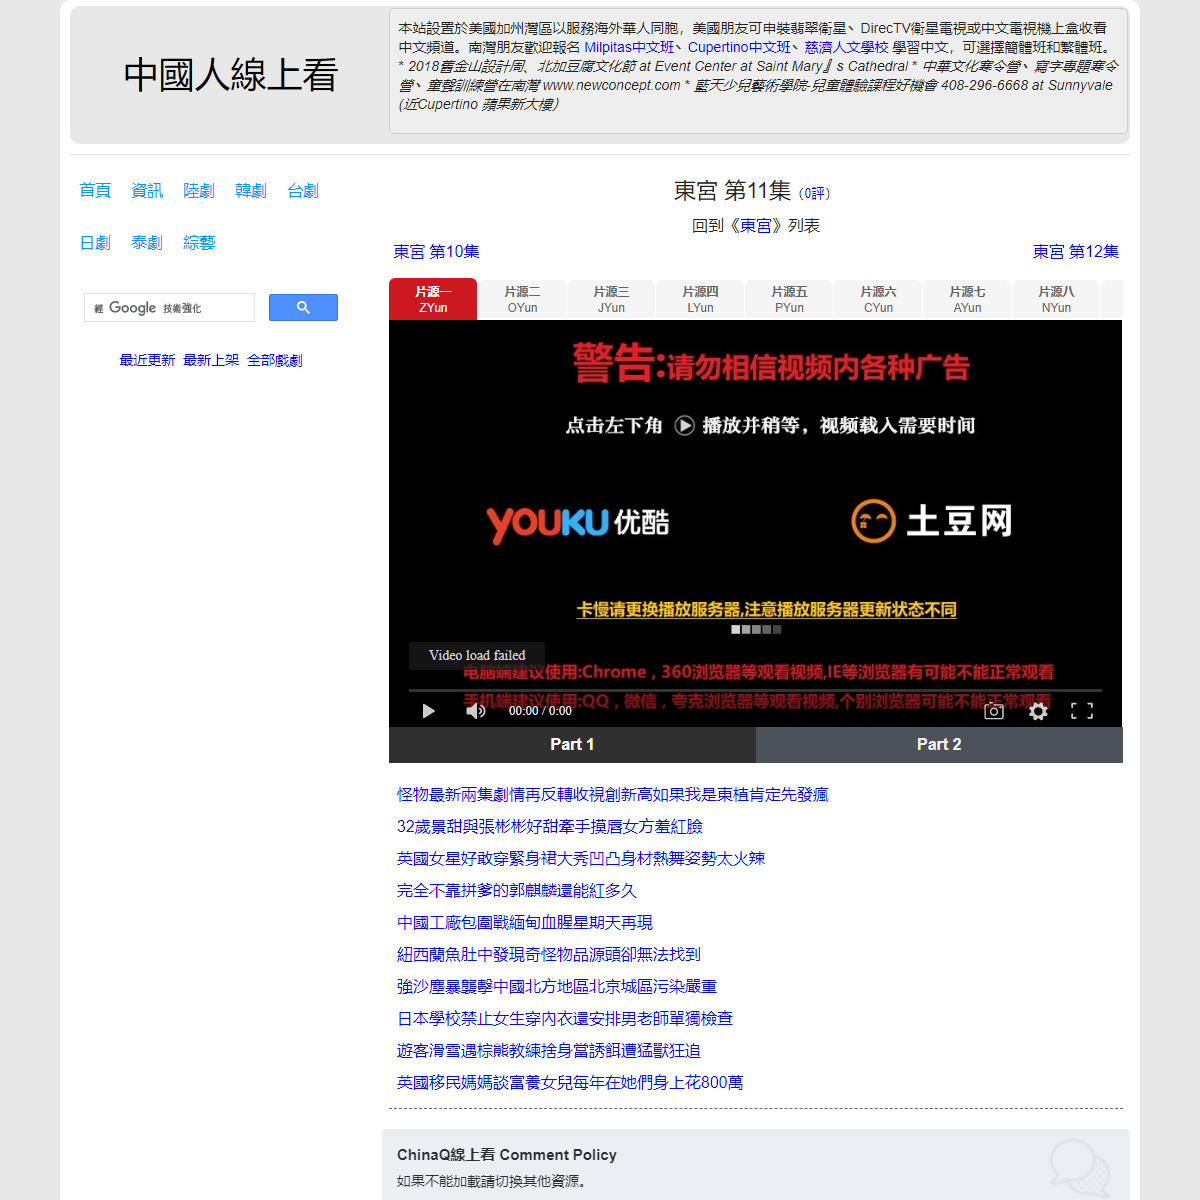 A complete backup of https://chinaq.tv/cn190214b/11.html